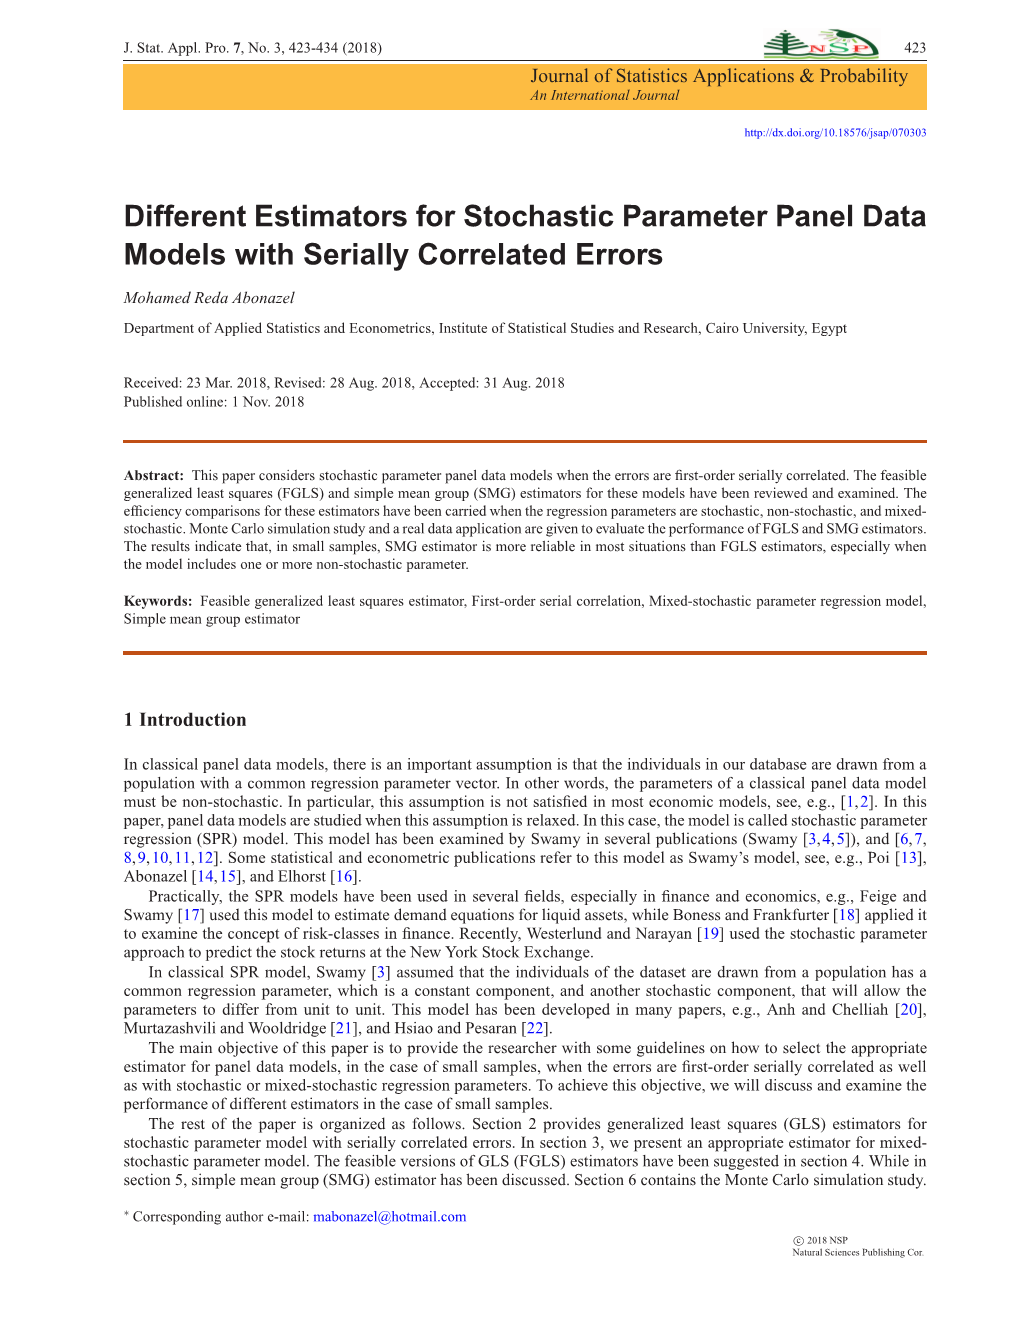 Different Estimators for Stochastic Parameter Panel Data Models with Serially Correlated Errors -.:: Natural Sciences Publishing